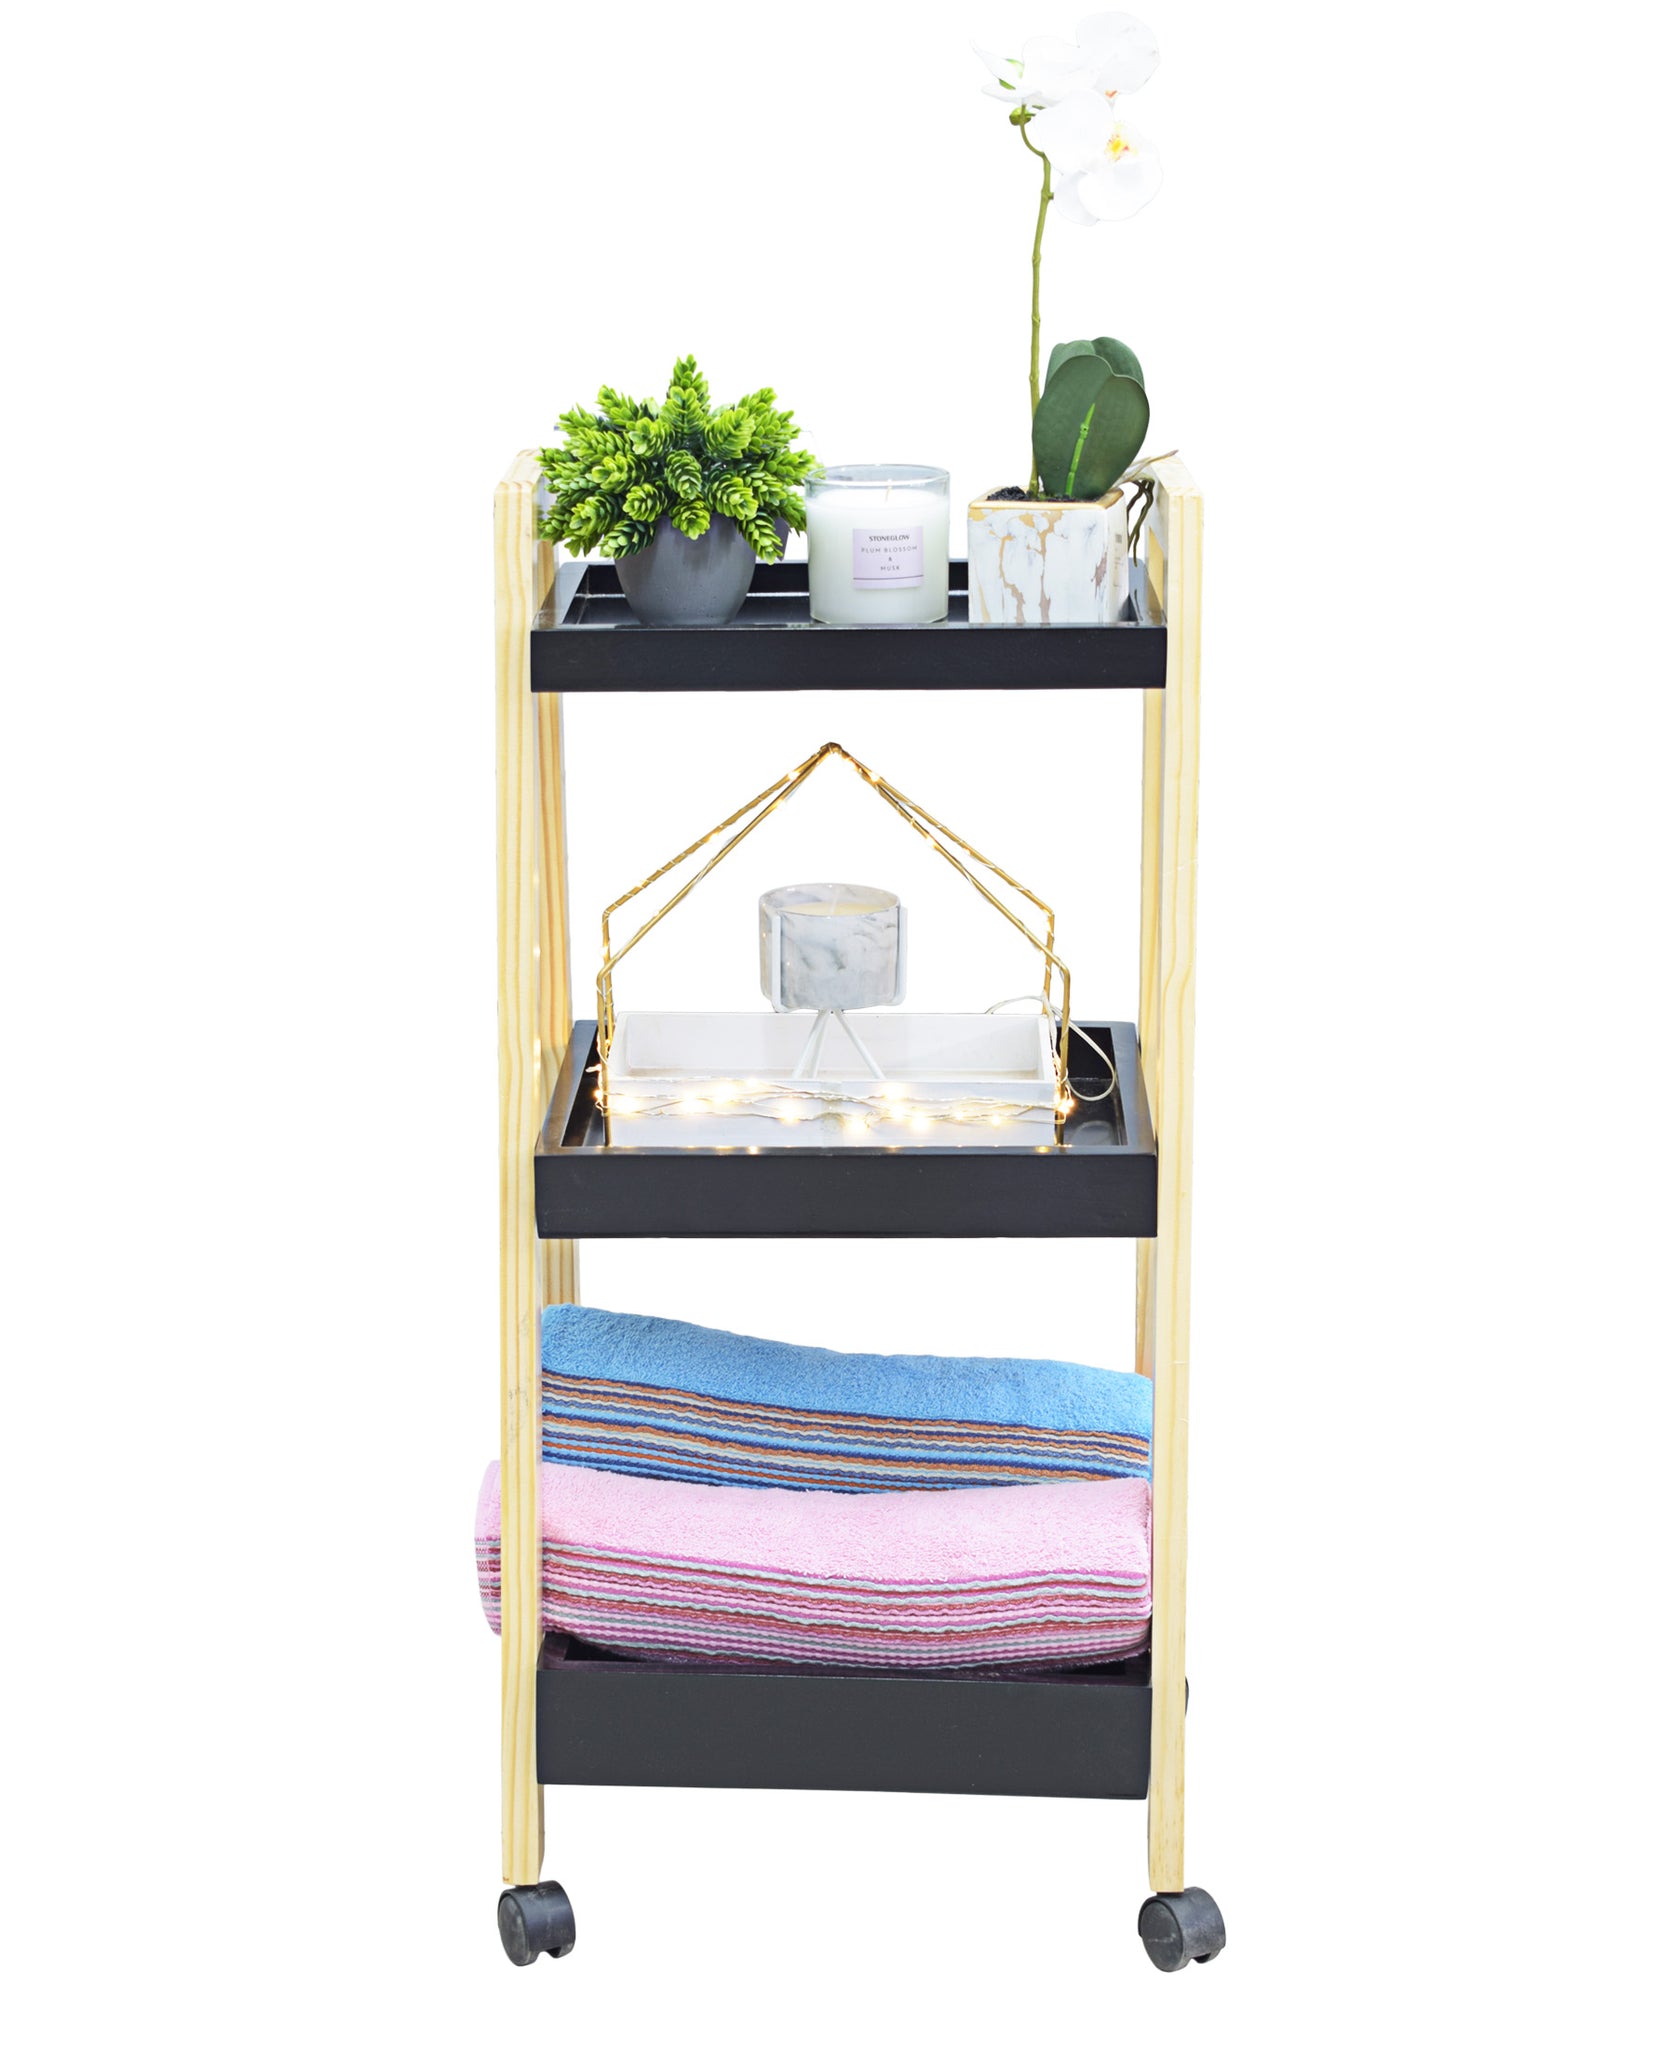 Bathroom 3 Tier Stand With Wheels - Black